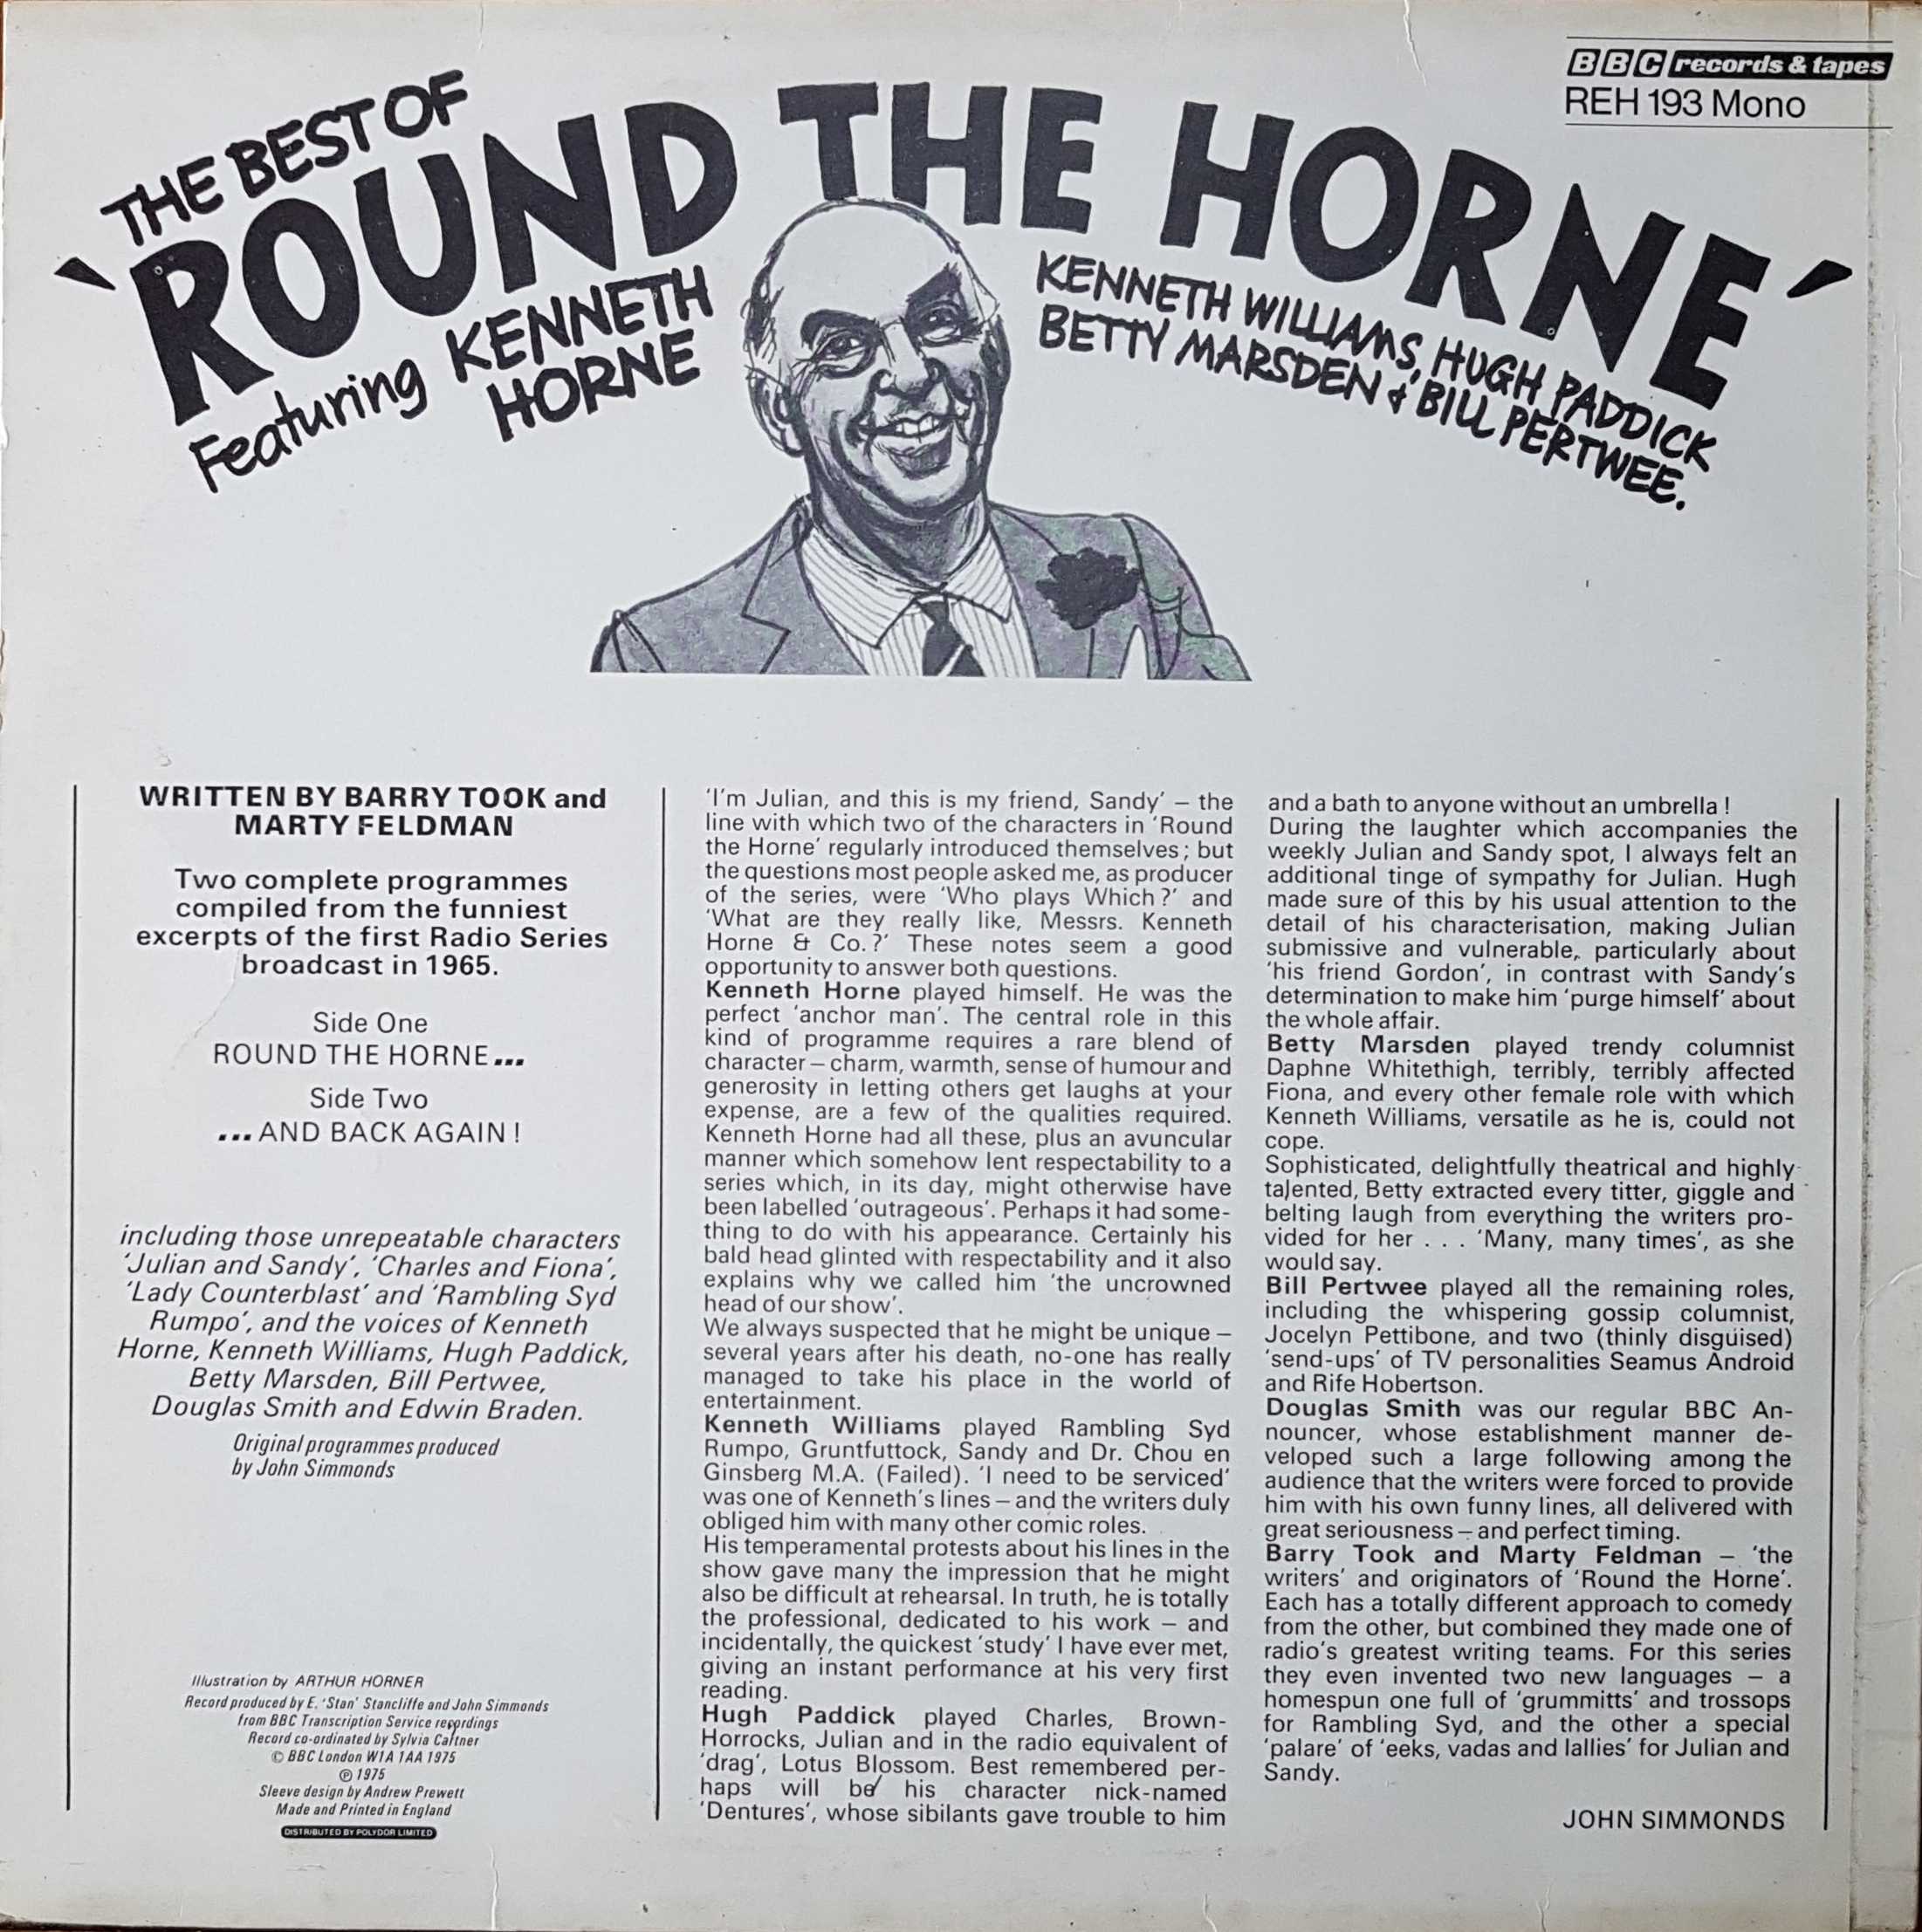 Picture of REH 193 The best of round the Horne by artist Barry Took / Marty Feldman from the BBC records and Tapes library